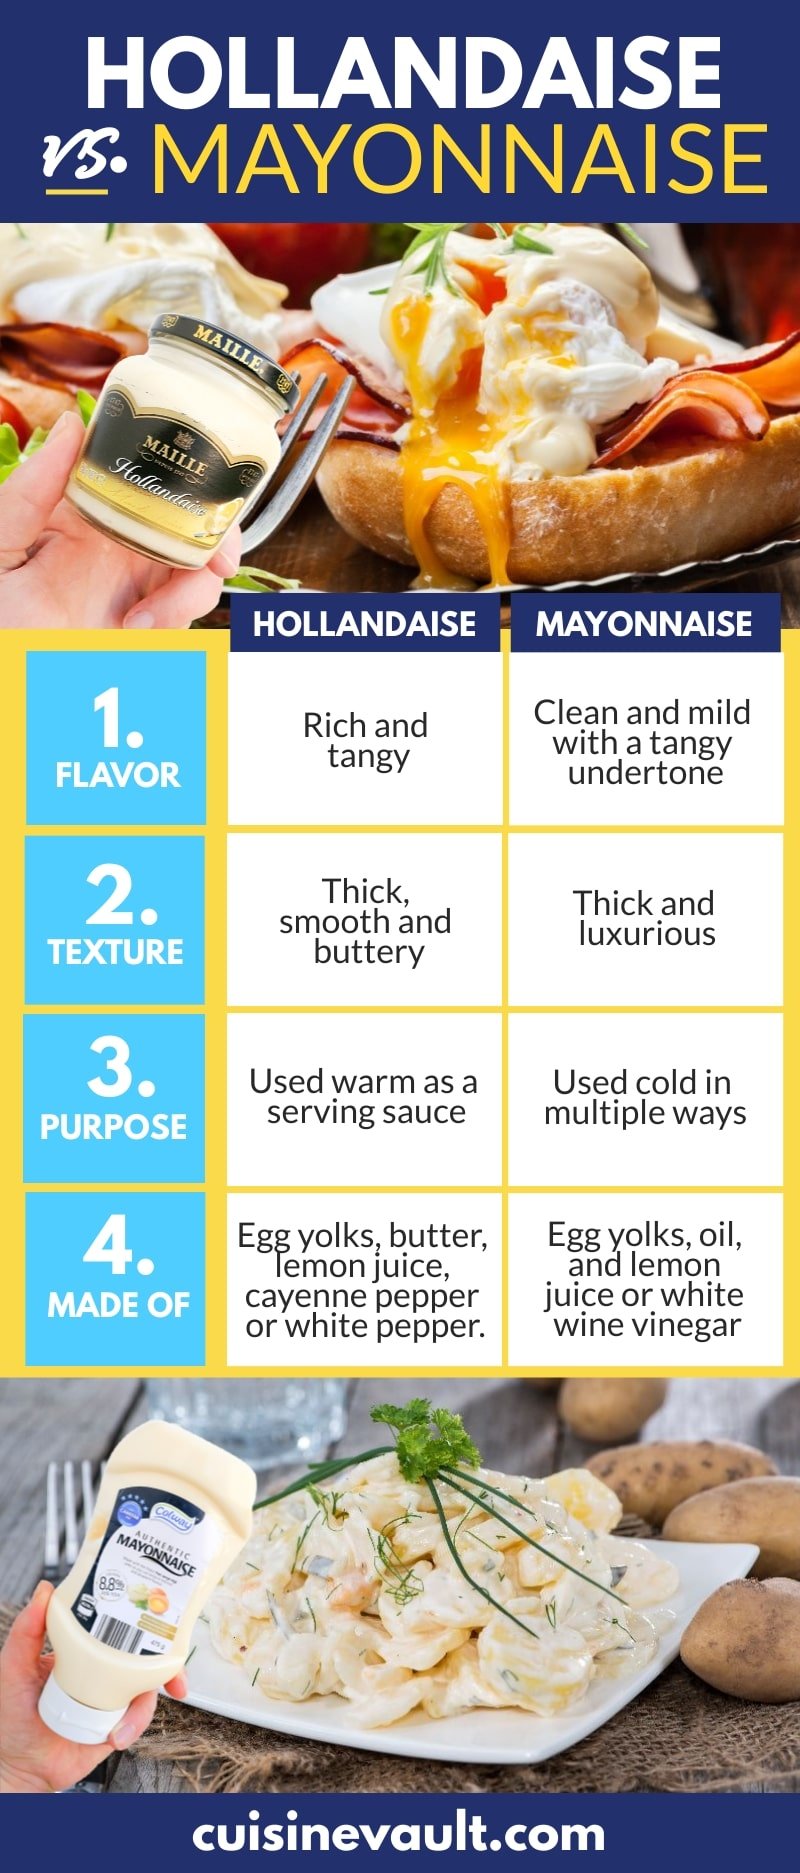 Infographic comparing hollandaise and mayonnaise